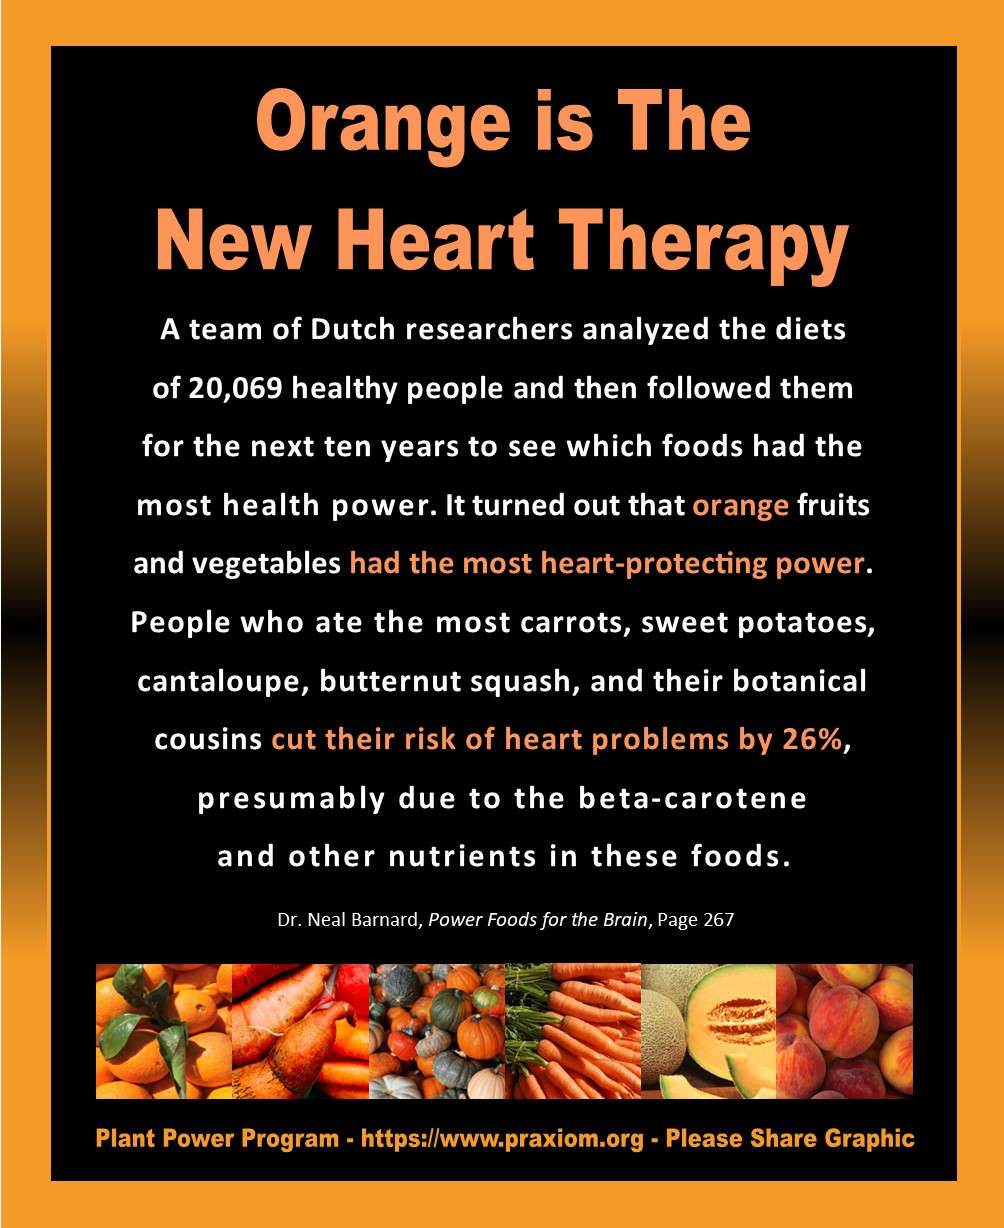 Orange is the New Heart Therapy - Dr. Neal Barnard